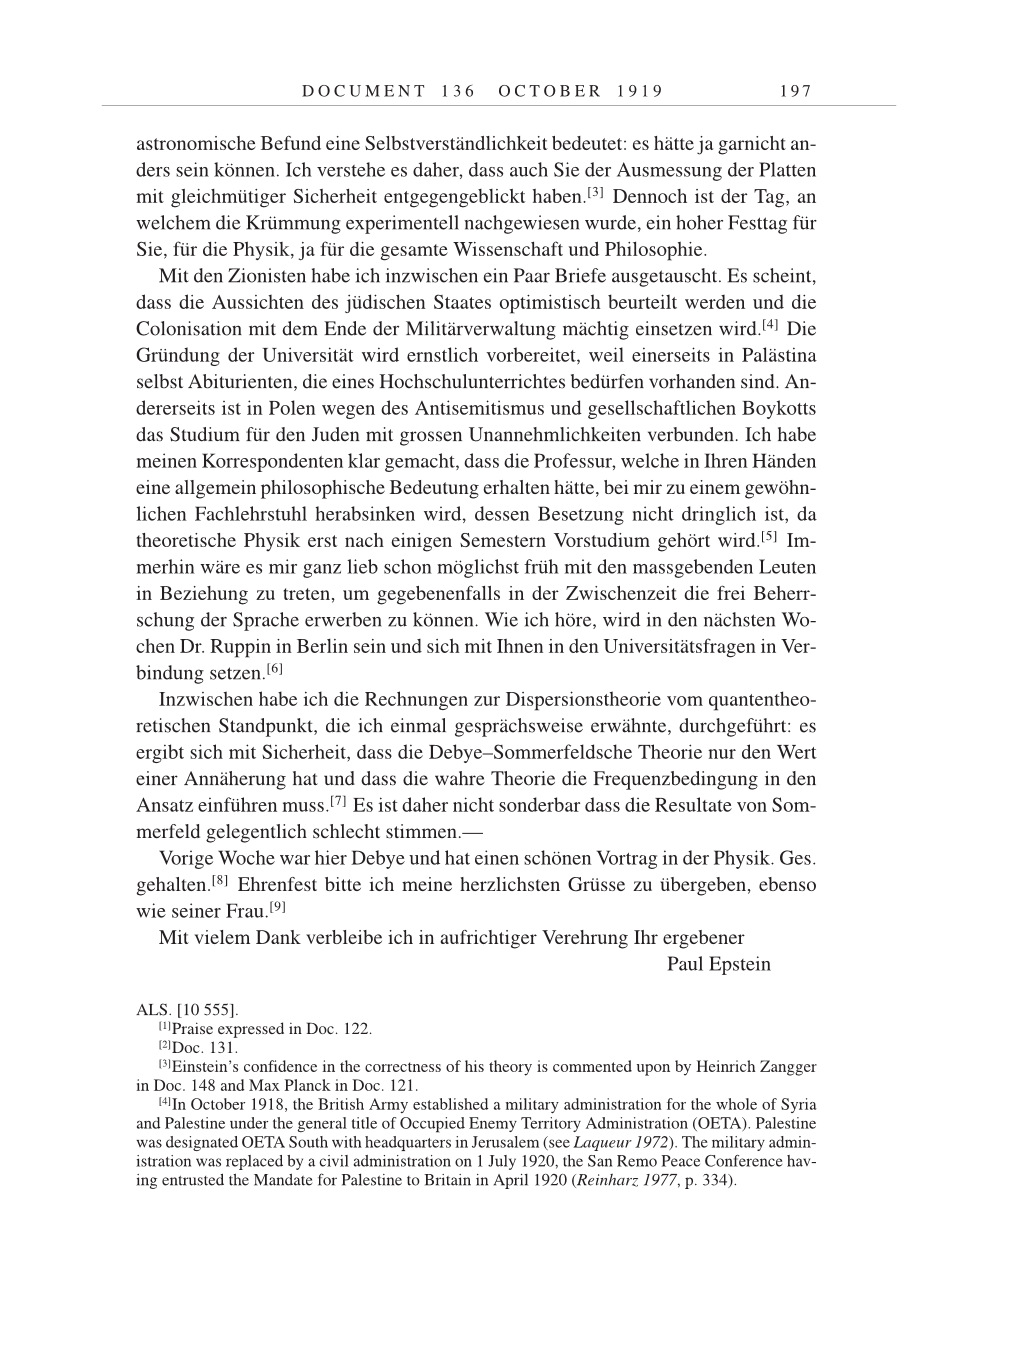 Volume 9: The Berlin Years: Correspondence January 1919-April 1920 page 197